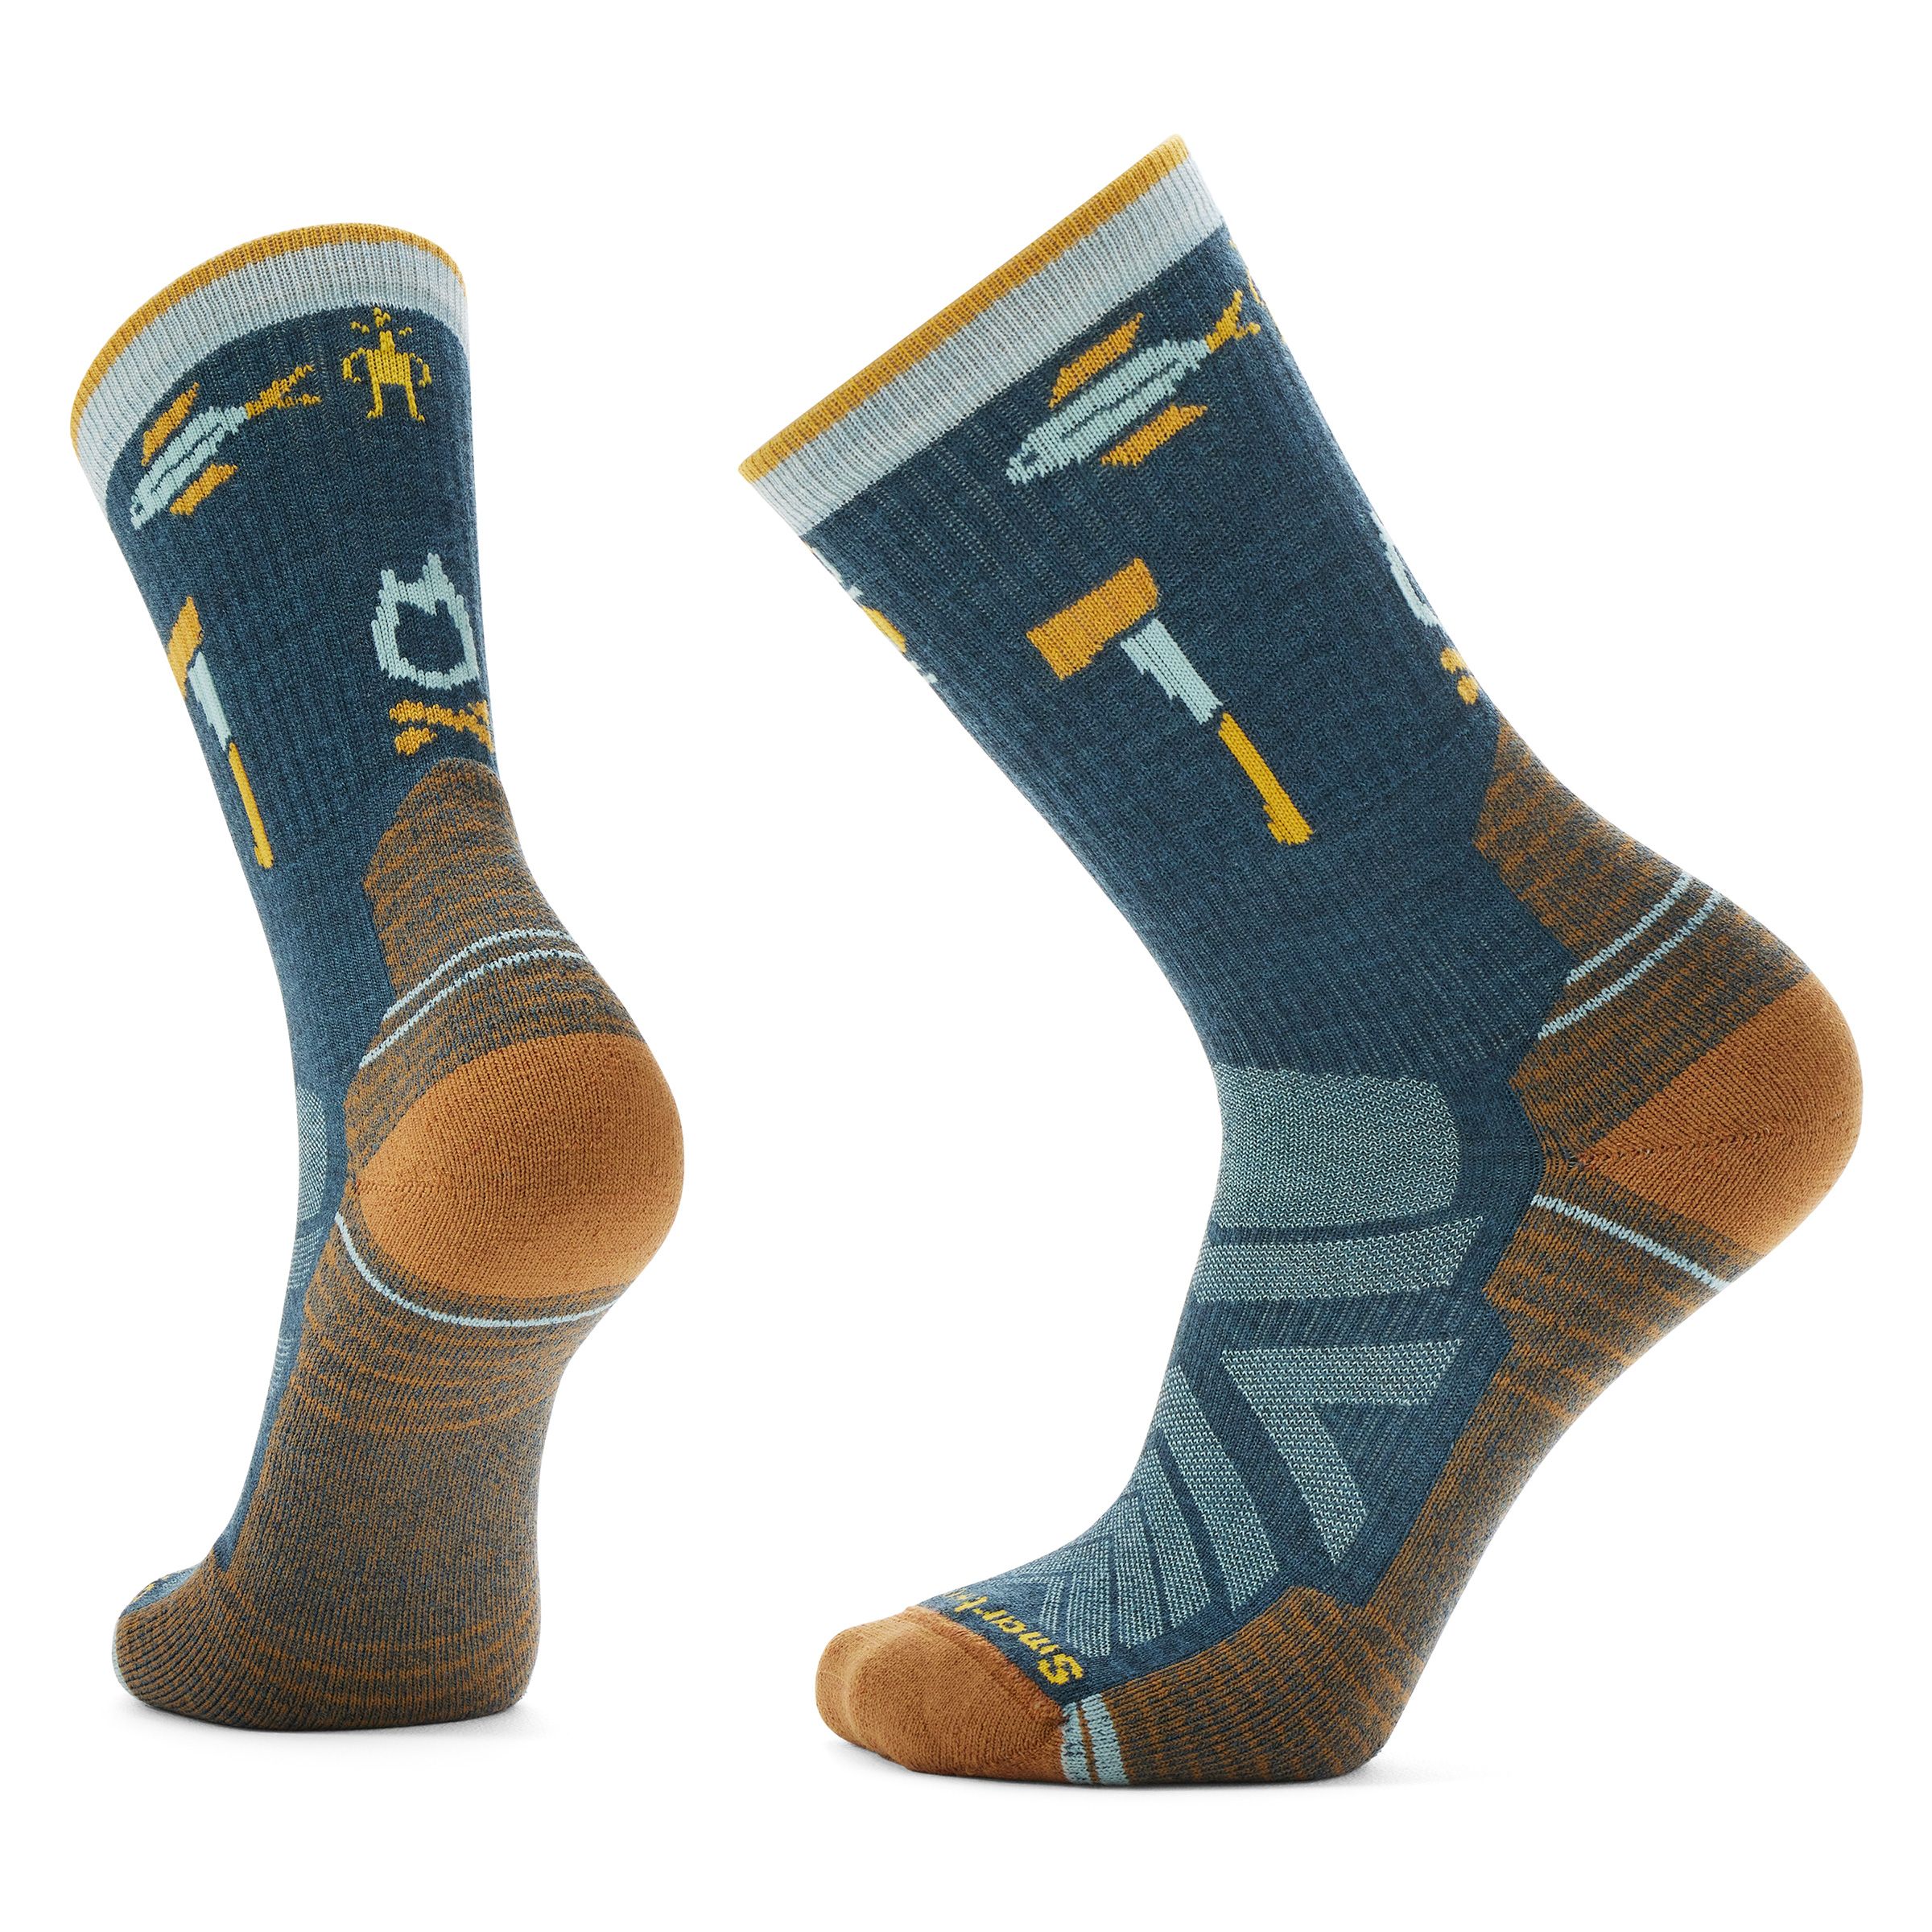 Limited Edition Winter Socks: Order now